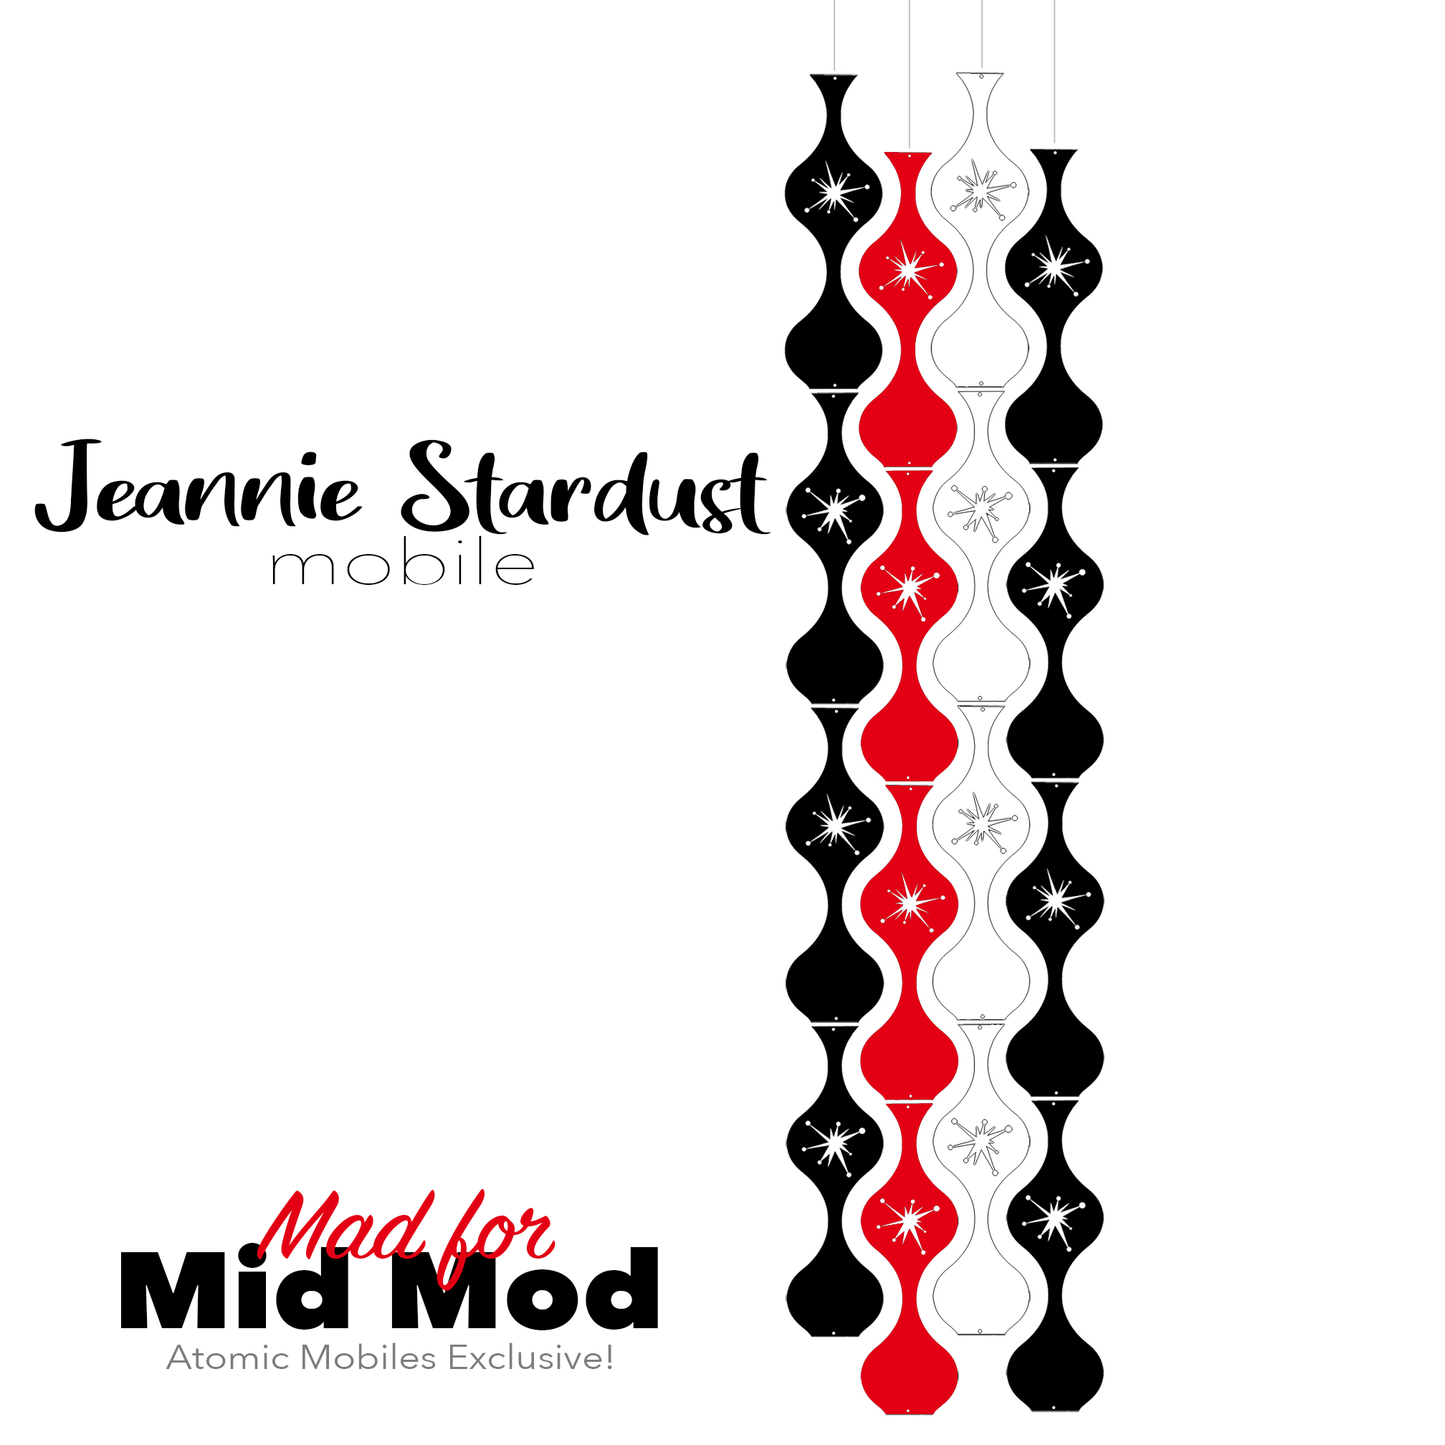 Mad for Mid Mod Jeannie Stardust Hanging Art Mobile - mid century modern home decor in Black Red and White - by AtomicMobiles.com